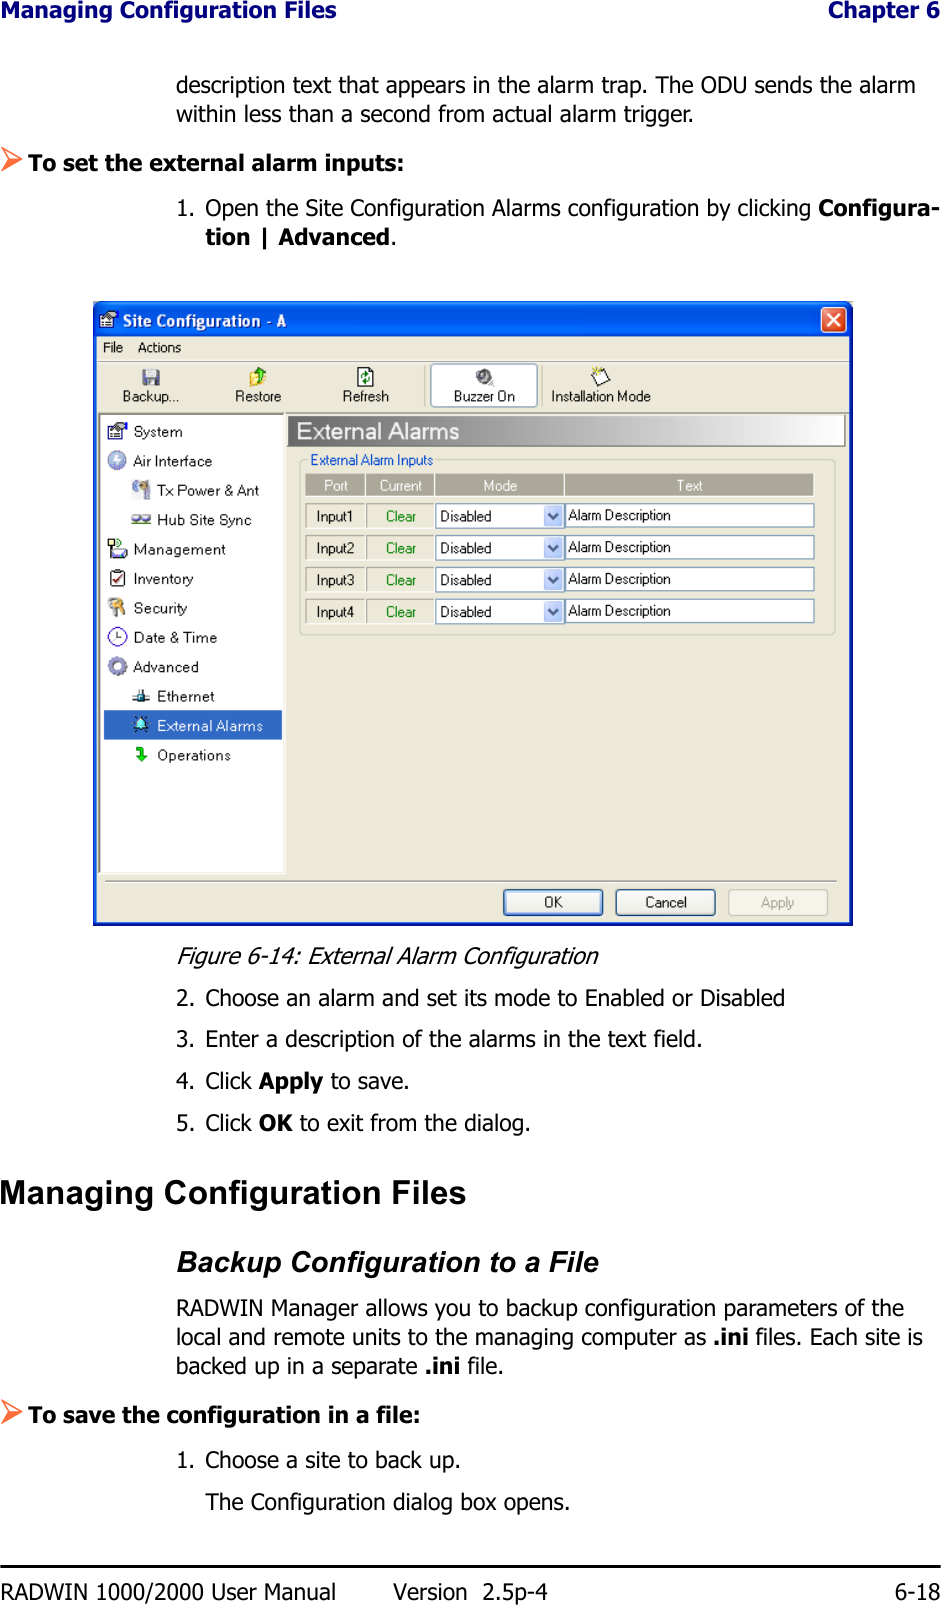 Managing Configuration Files  Chapter 6RADWIN 1000/2000 User Manual Version  2.5p-4 6-18description text that appears in the alarm trap. The ODU sends the alarm within less than a second from actual alarm trigger.¾To set the external alarm inputs:1. Open the Site Configuration Alarms configuration by clicking Configura-tion | Advanced.Figure 6-14: External Alarm Configuration2. Choose an alarm and set its mode to Enabled or Disabled3. Enter a description of the alarms in the text field.4. Click Apply to save.5. Click OK to exit from the dialog.Managing Configuration FilesBackup Configuration to a FileRADWIN Manager allows you to backup configuration parameters of the local and remote units to the managing computer as .ini files. Each site is backed up in a separate .ini file.¾To save the configuration in a file:1. Choose a site to back up.The Configuration dialog box opens.